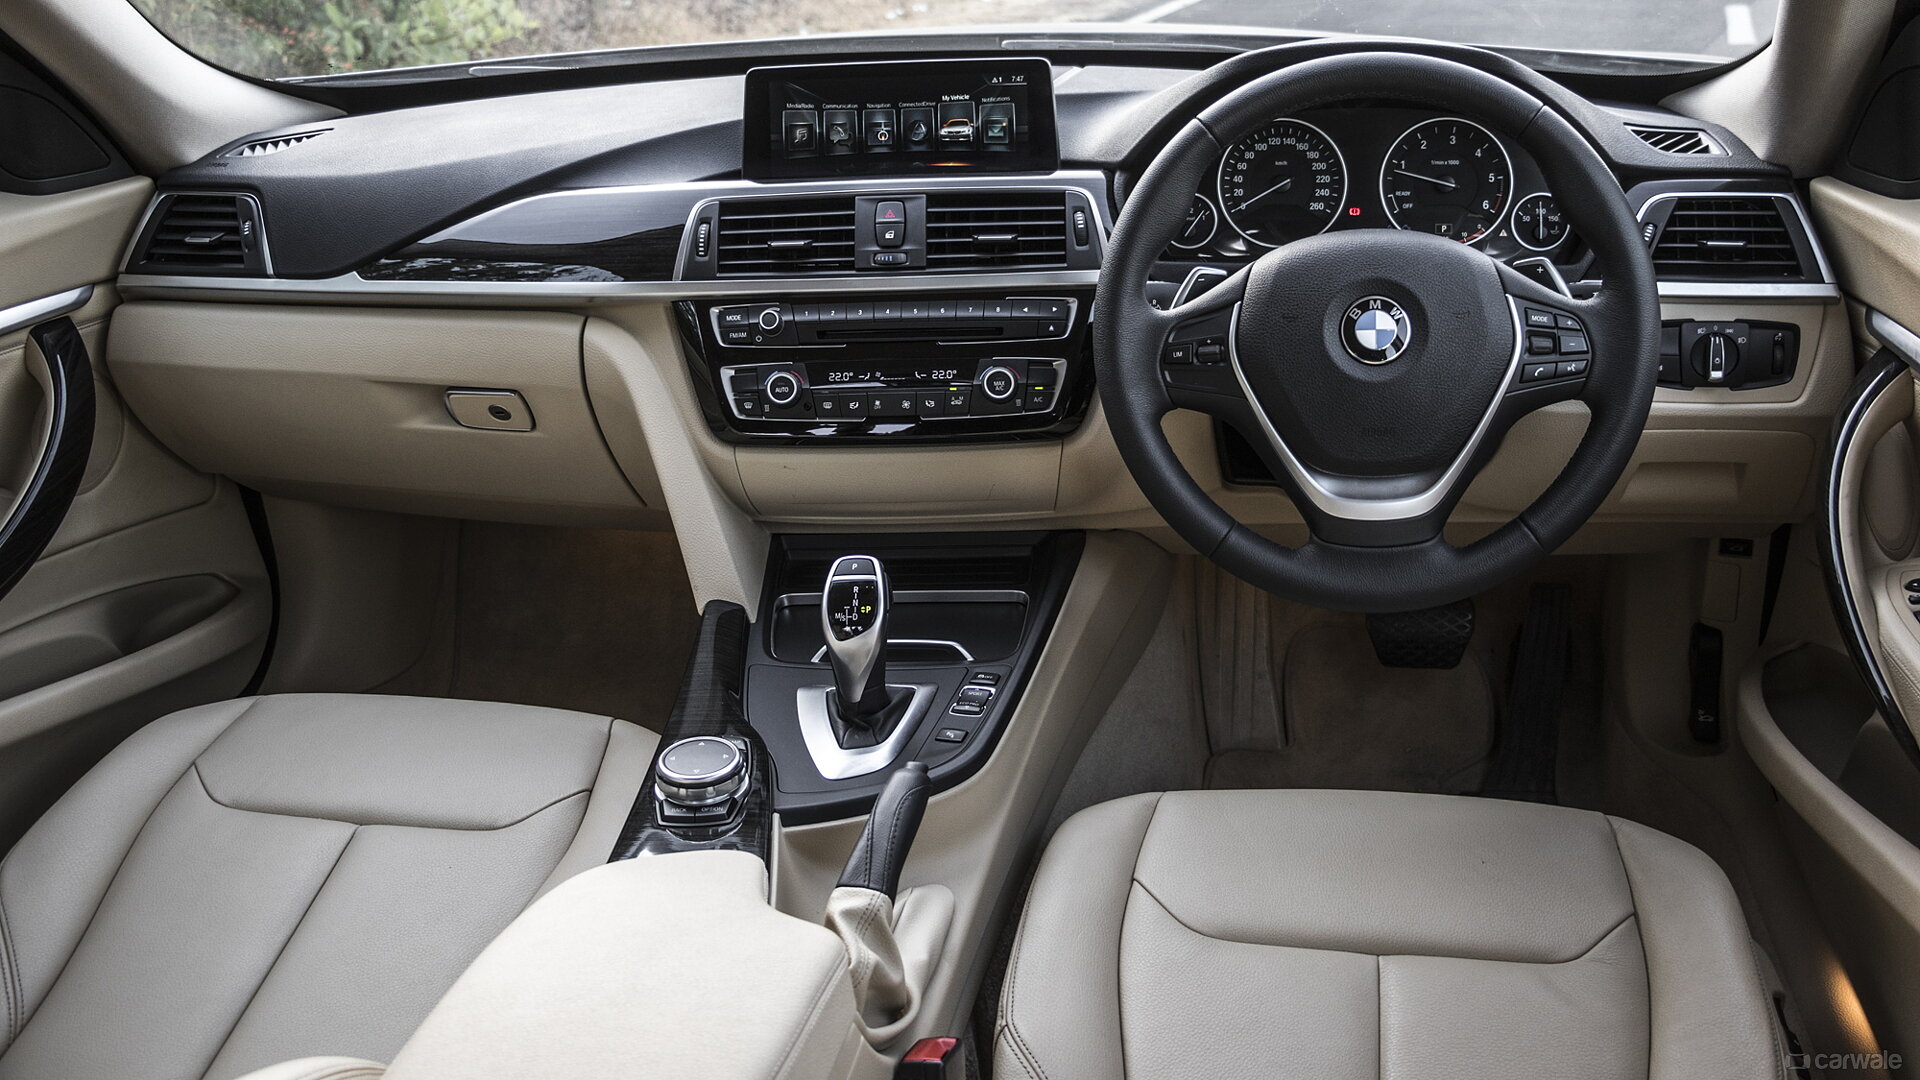 3 Series Gt Interior Image 3 Series Gt Photos In India Carwale